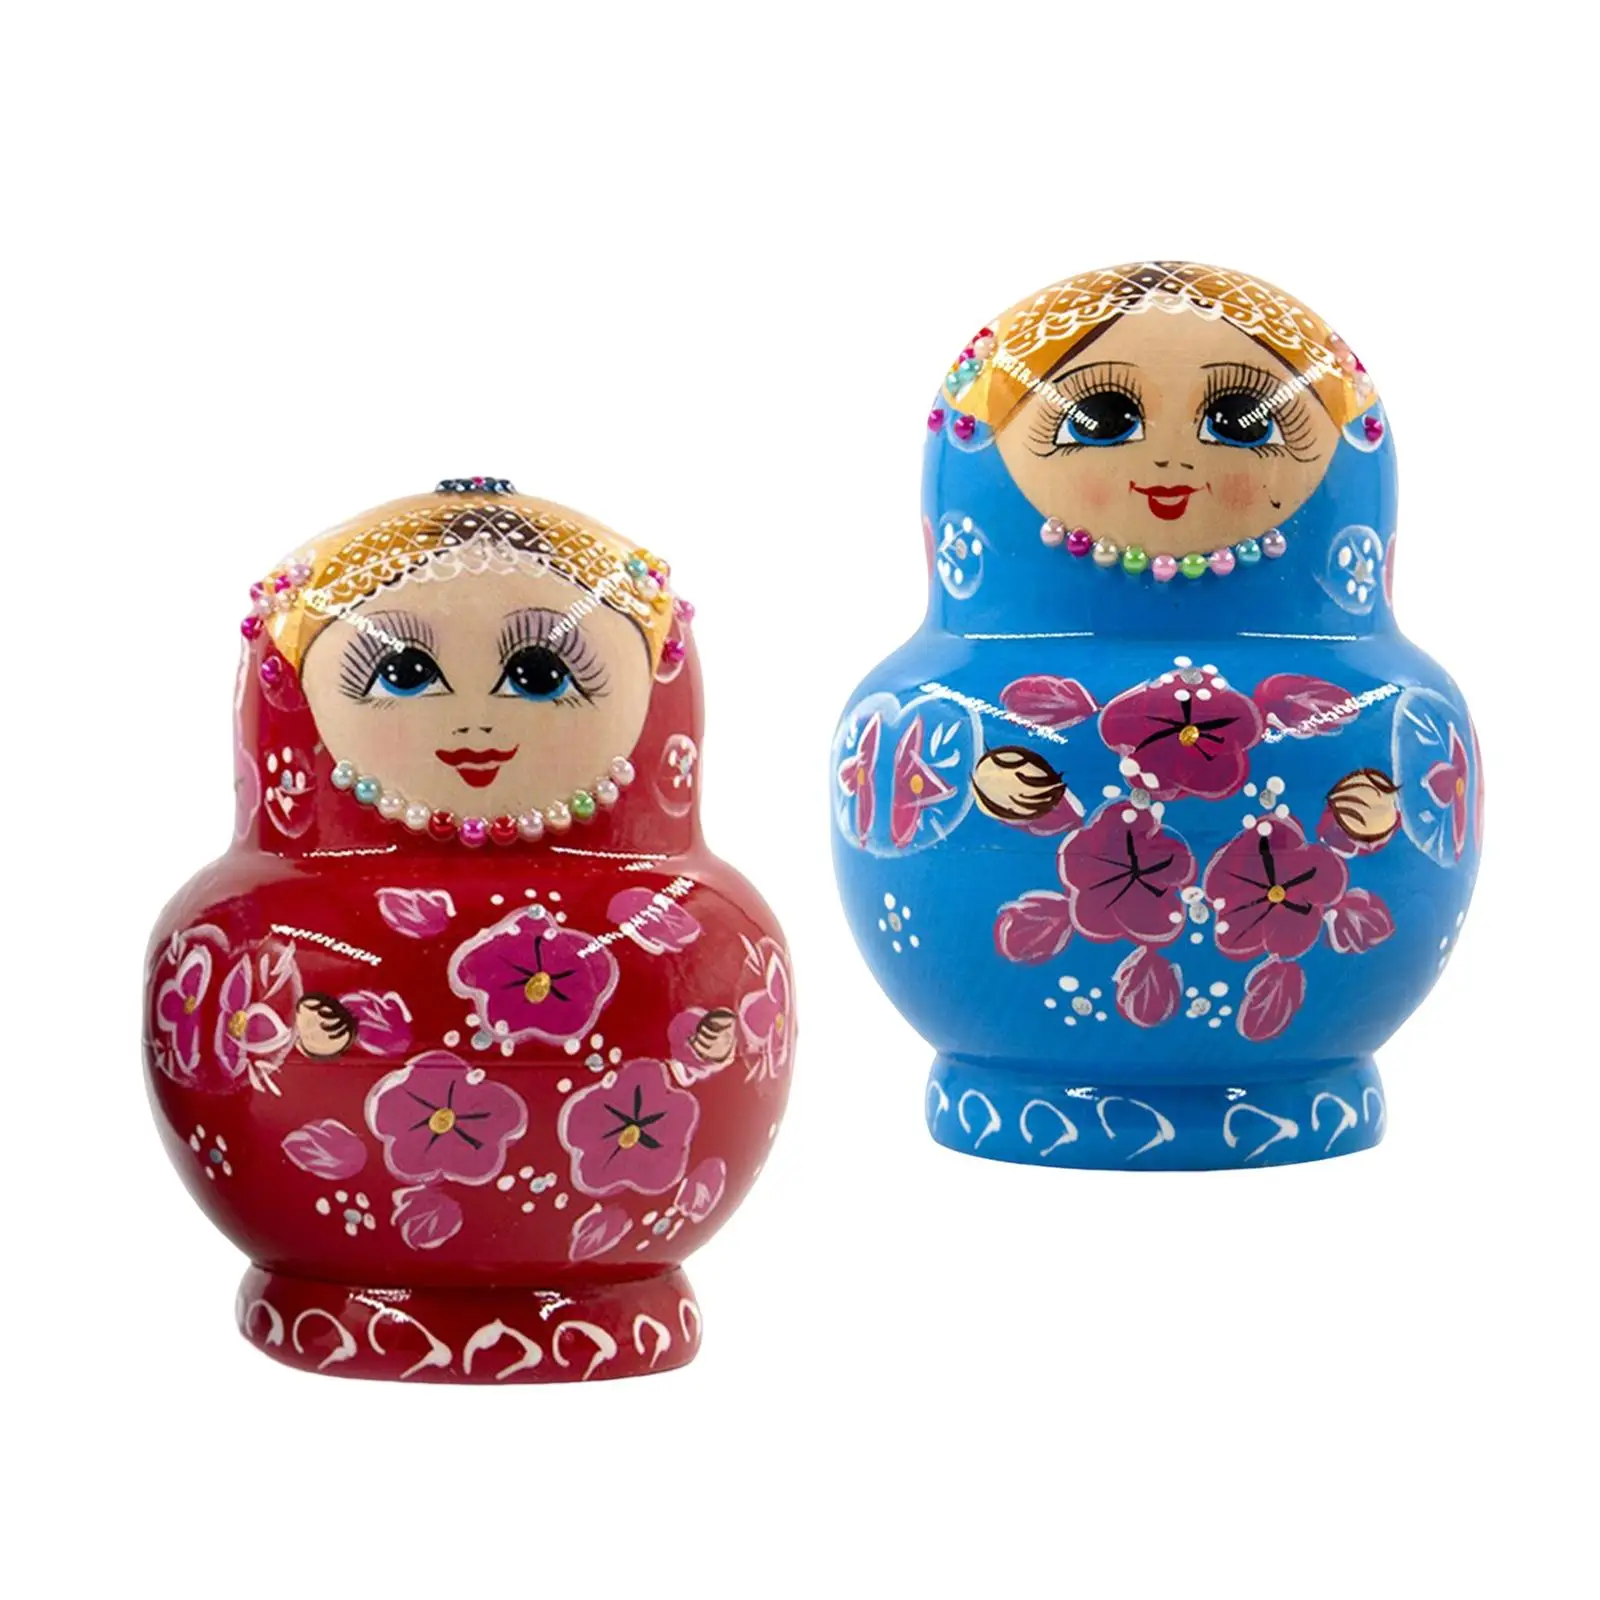 10Pcs Nesting Dolls Russian Nesting Dolls for Home Decor Holiday Gifts